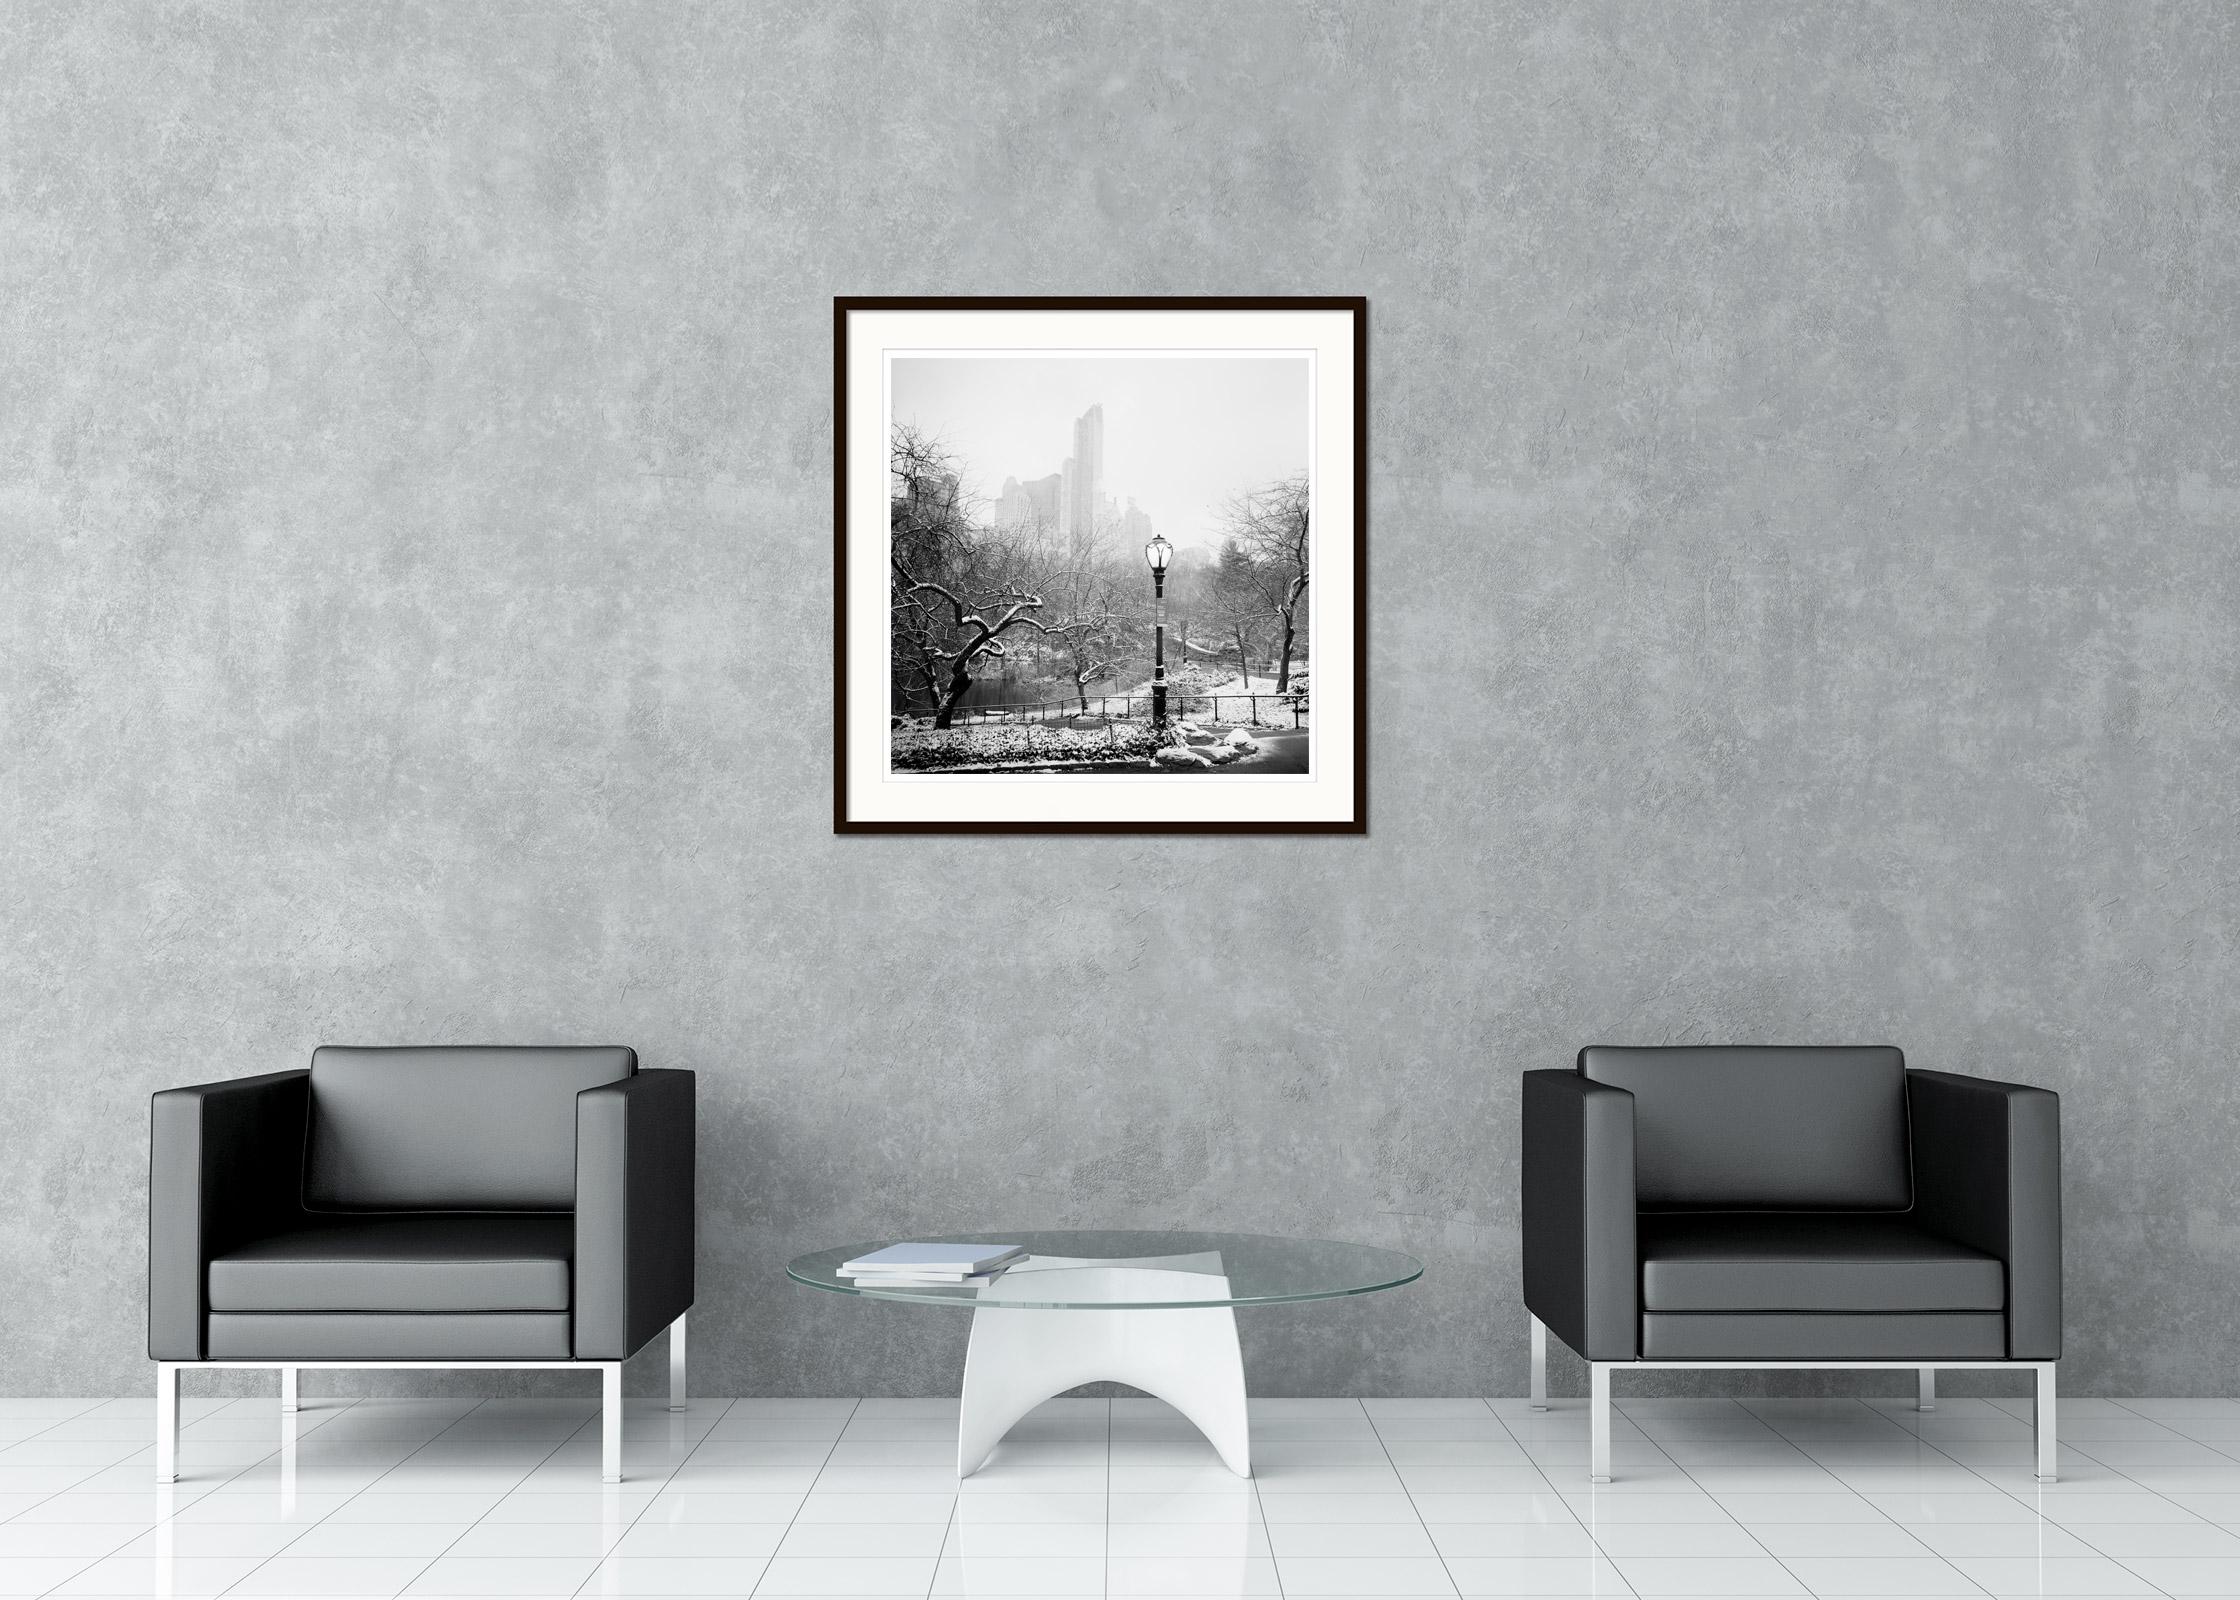 Black and white fine art cityscape - landscape photography print. Archival pigment ink print, edition of 9. Signed, titled, dated and numbered by artist. Certificate of authenticity included. Printed with 4cm white border.
International award winner